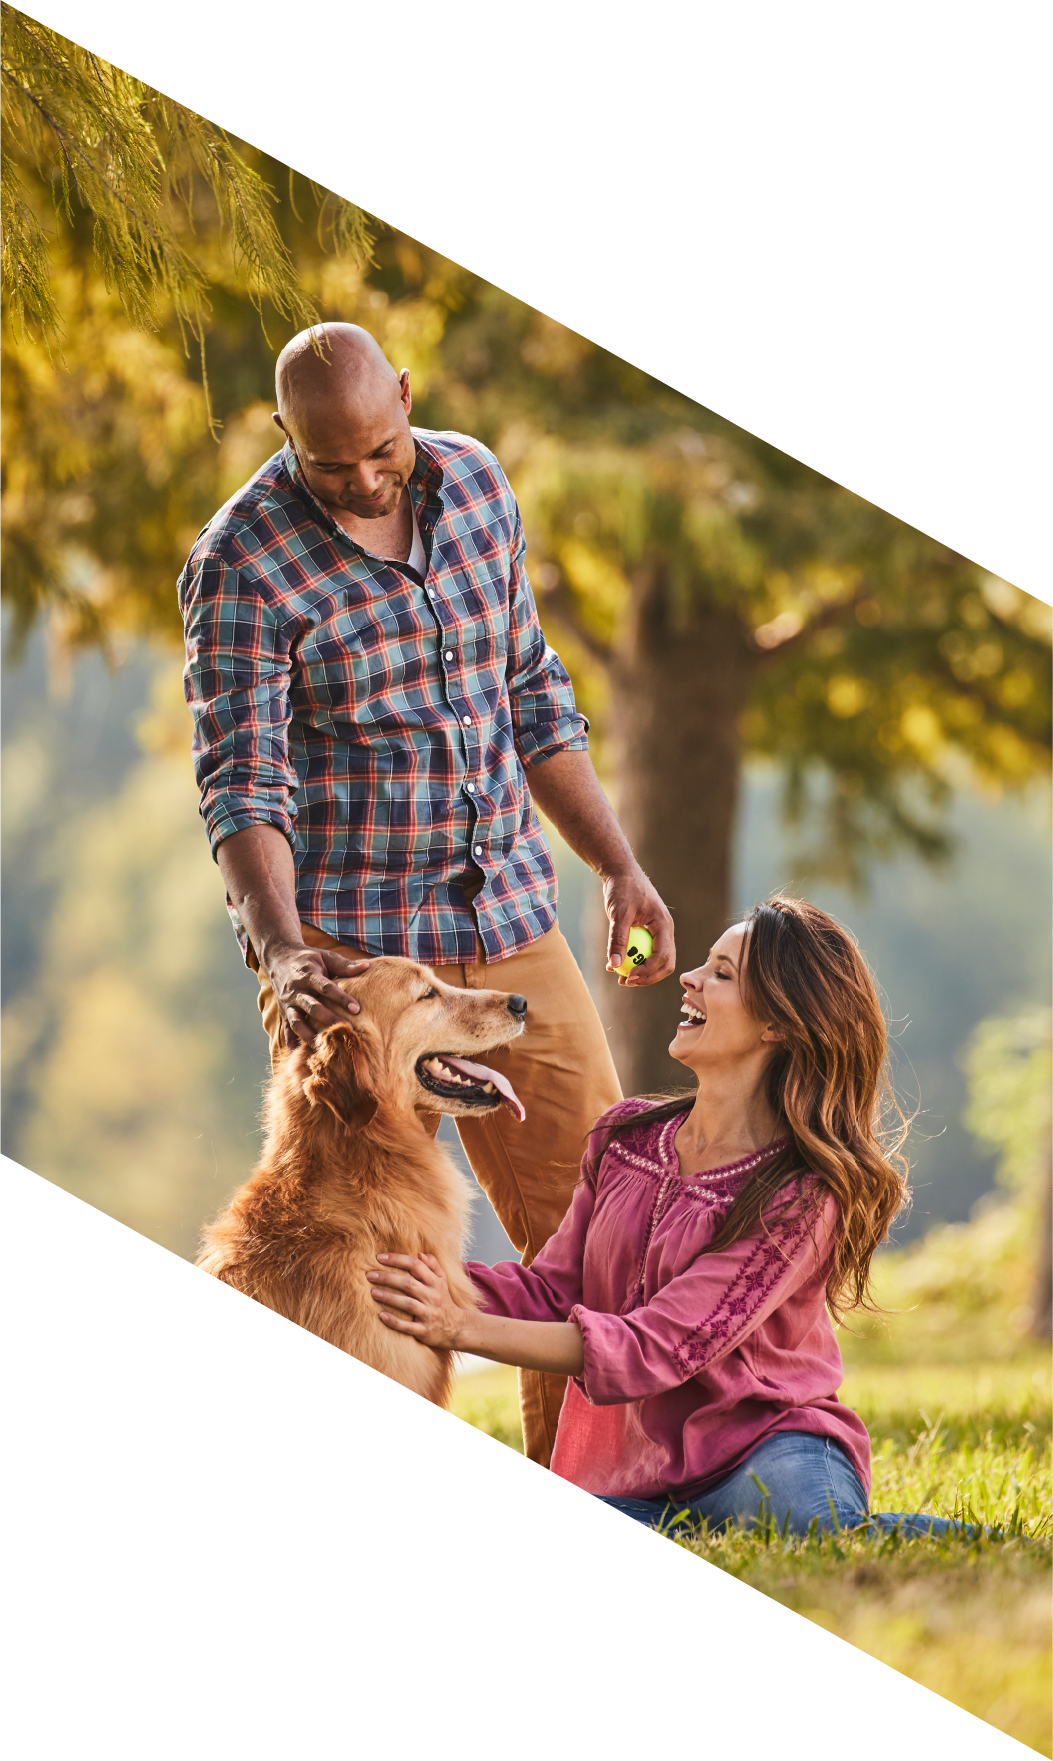 A happy couple enjoys nature and plays ball with their dog.